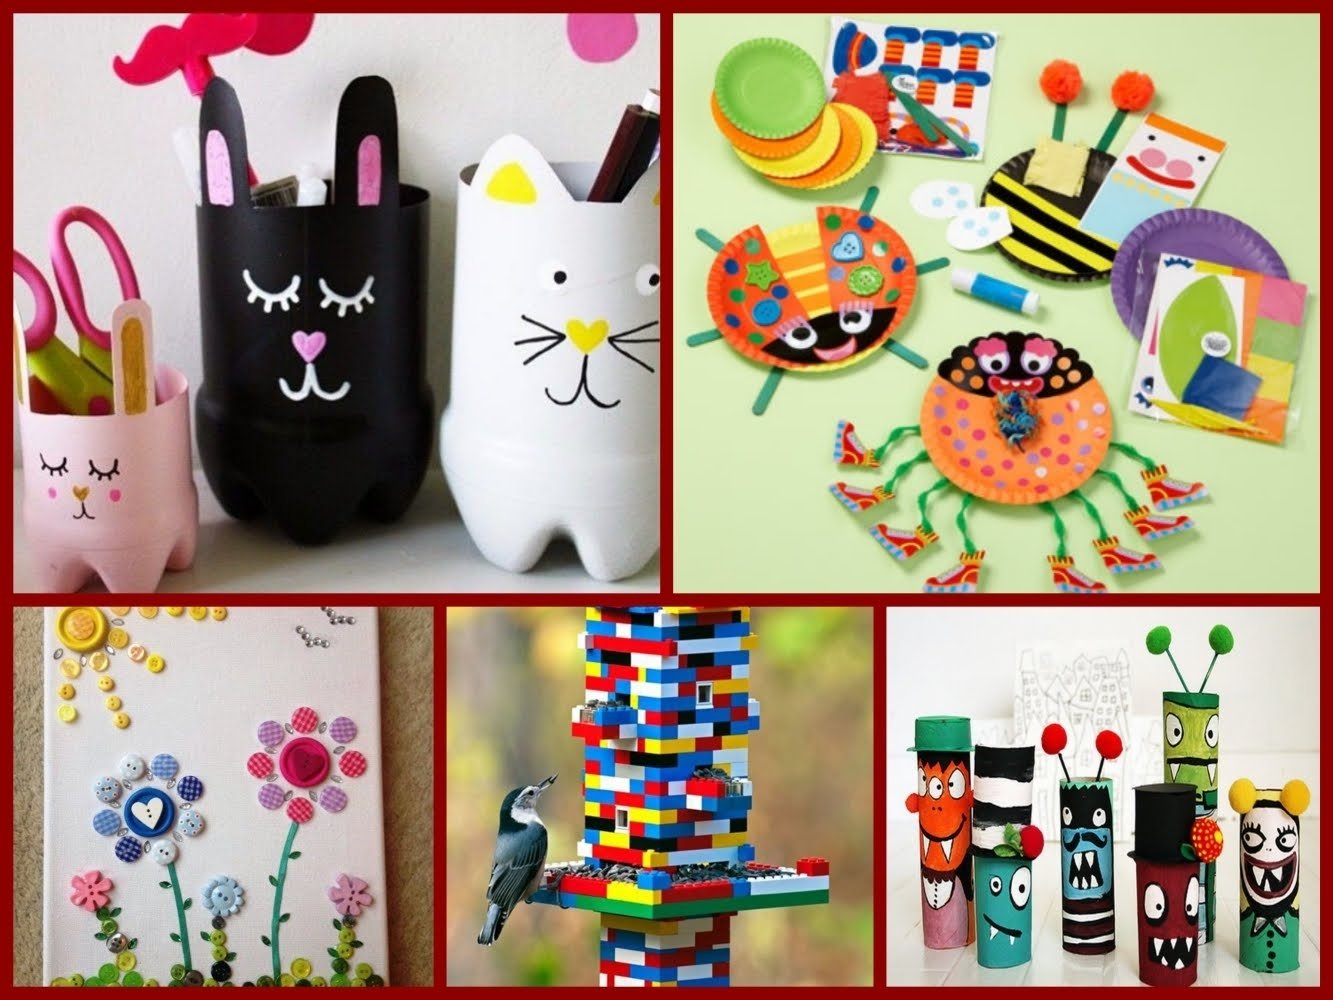 10 Awesome Recycled Projects For School Ideas 45 easy recycled crafts ideas for kids youtube 2022